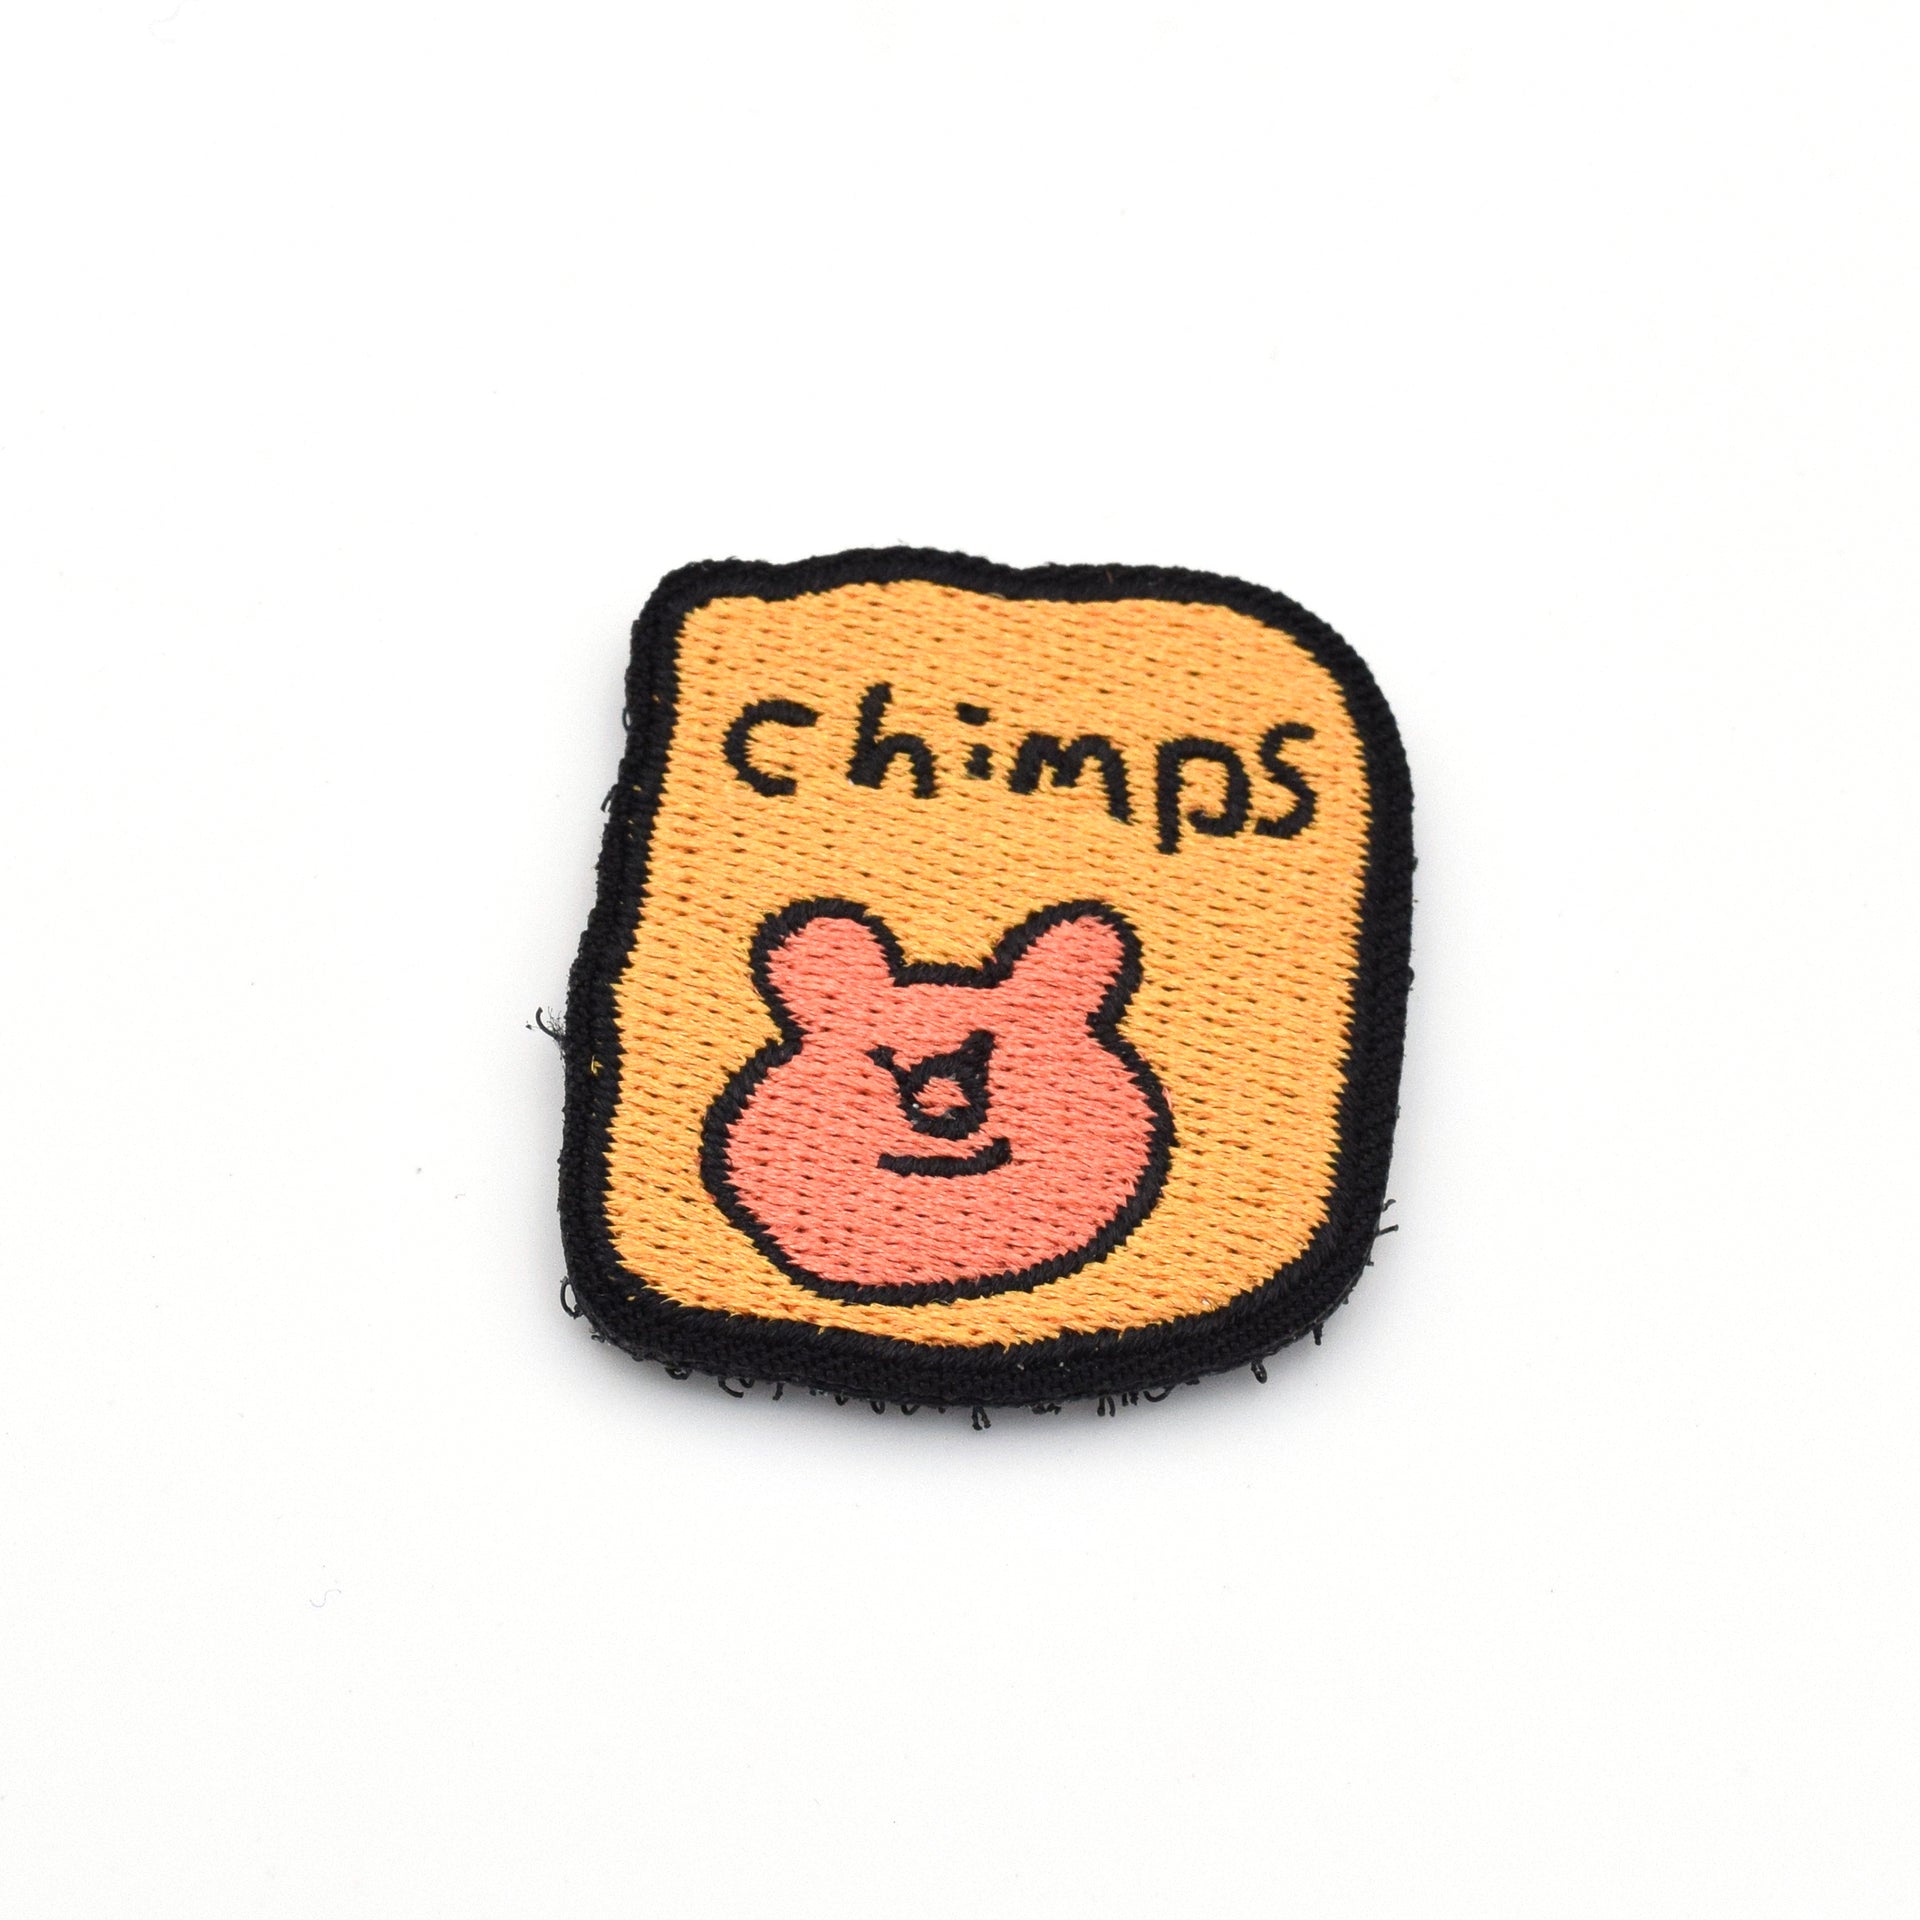 Bag Of Chimps Sticker Patch